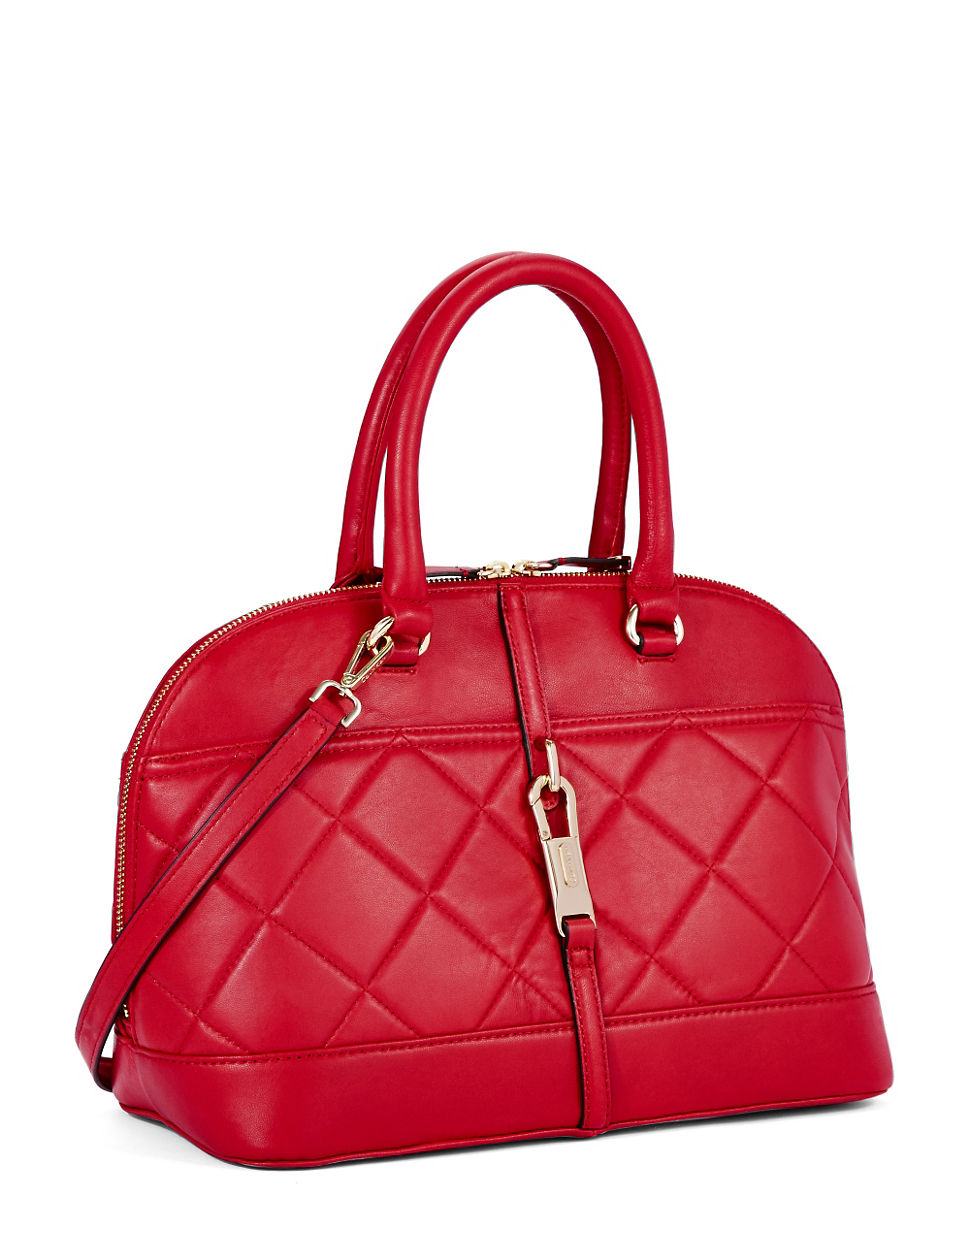 Calvin Klein Quilted Leather Hand Bag in Red | Lyst